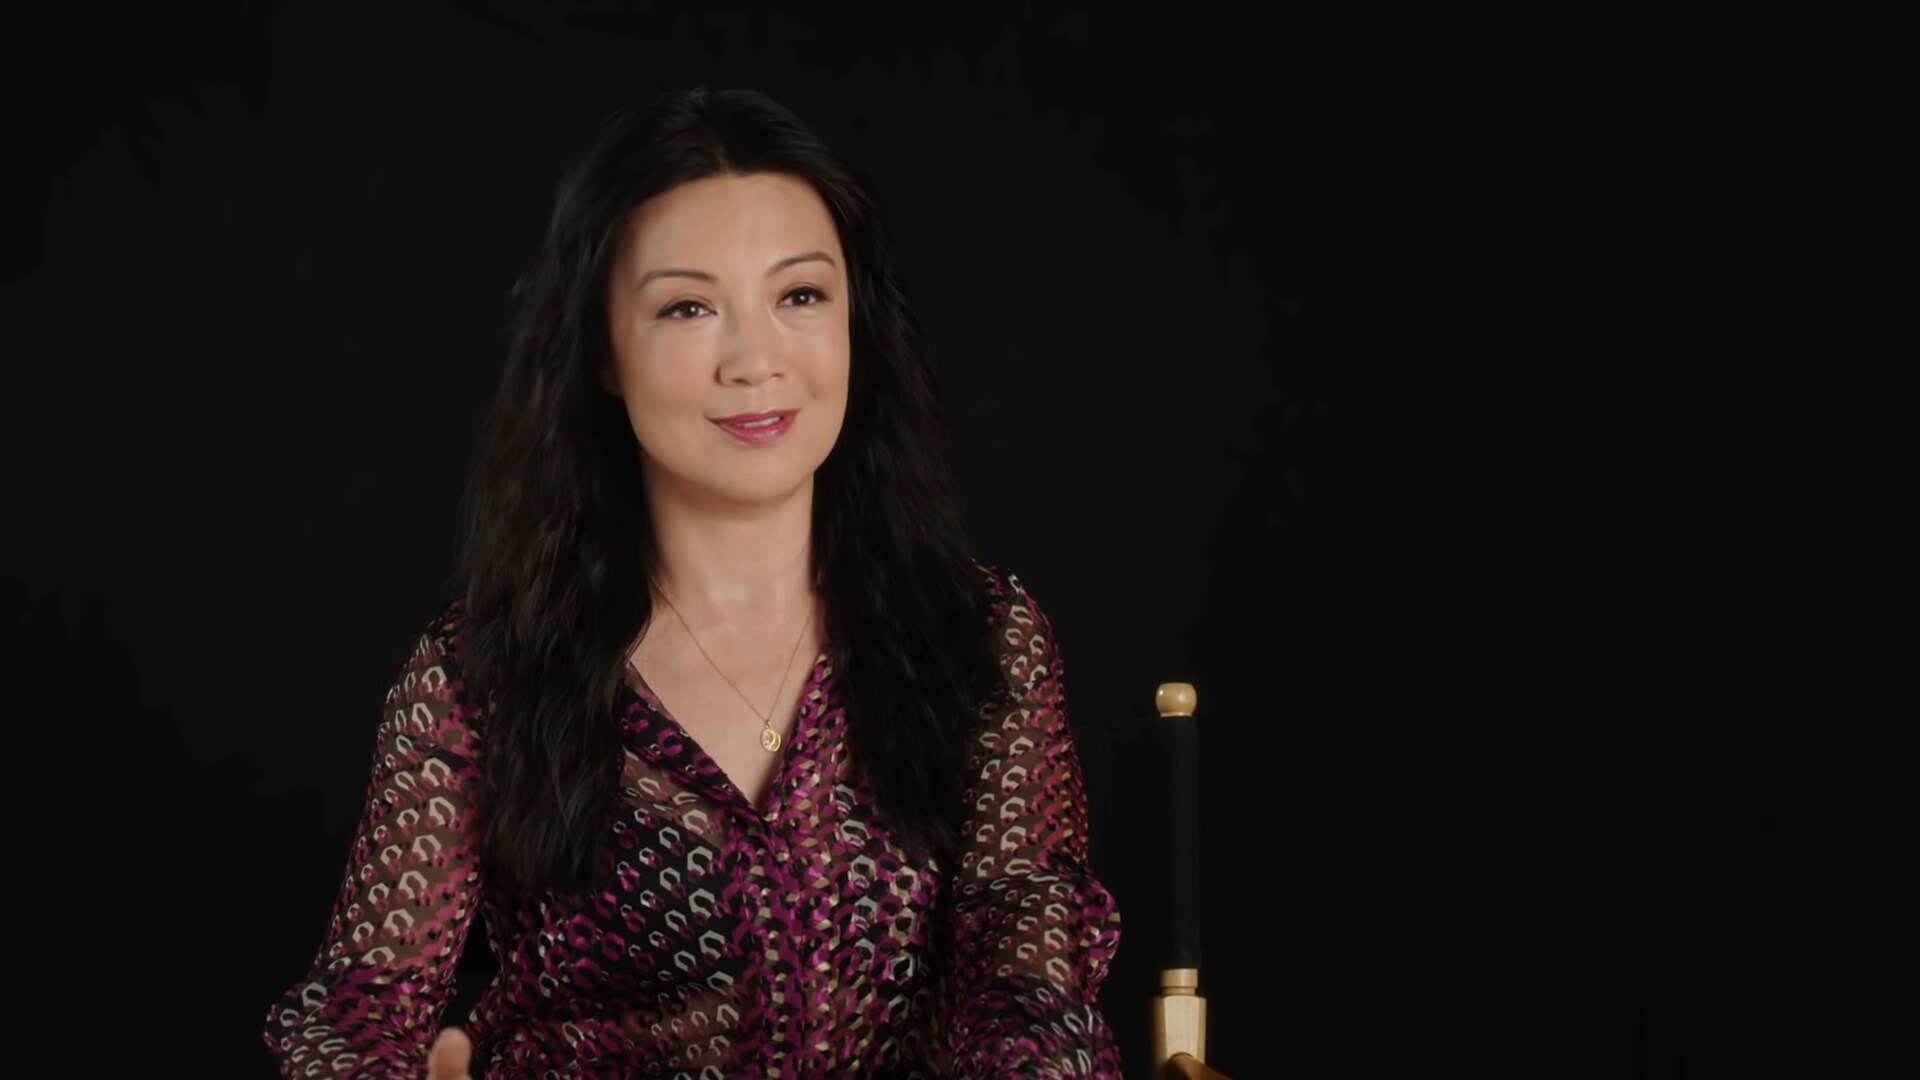 Ming-Na Wen sits against a black background and is interviewed about her role in The Book of Boba Fett